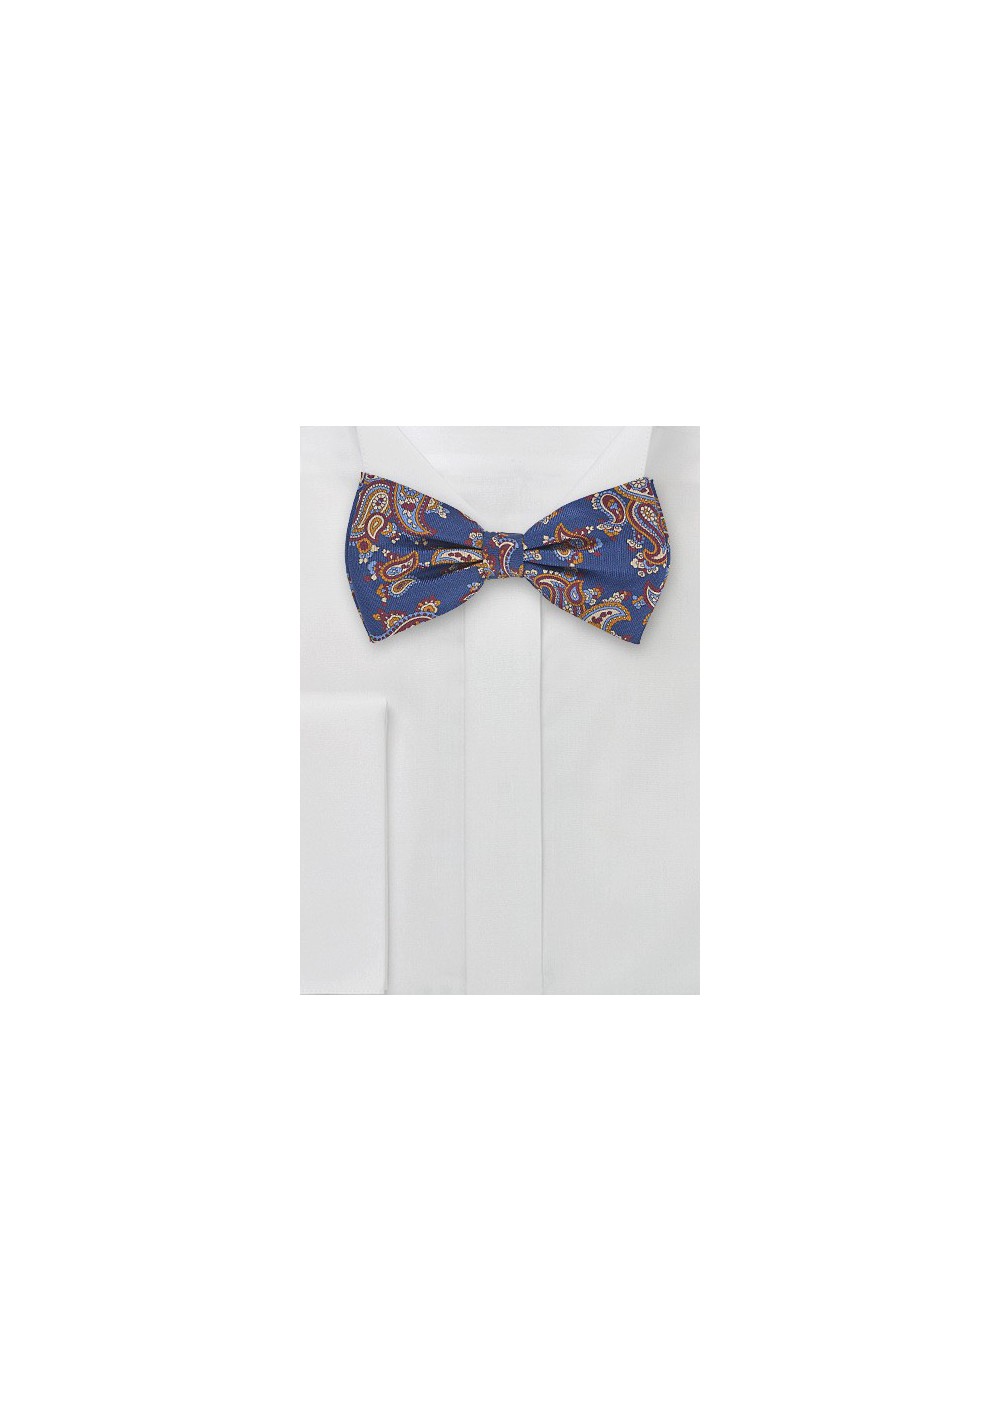 Paisley Patterned Pre-Tied Bow Tie